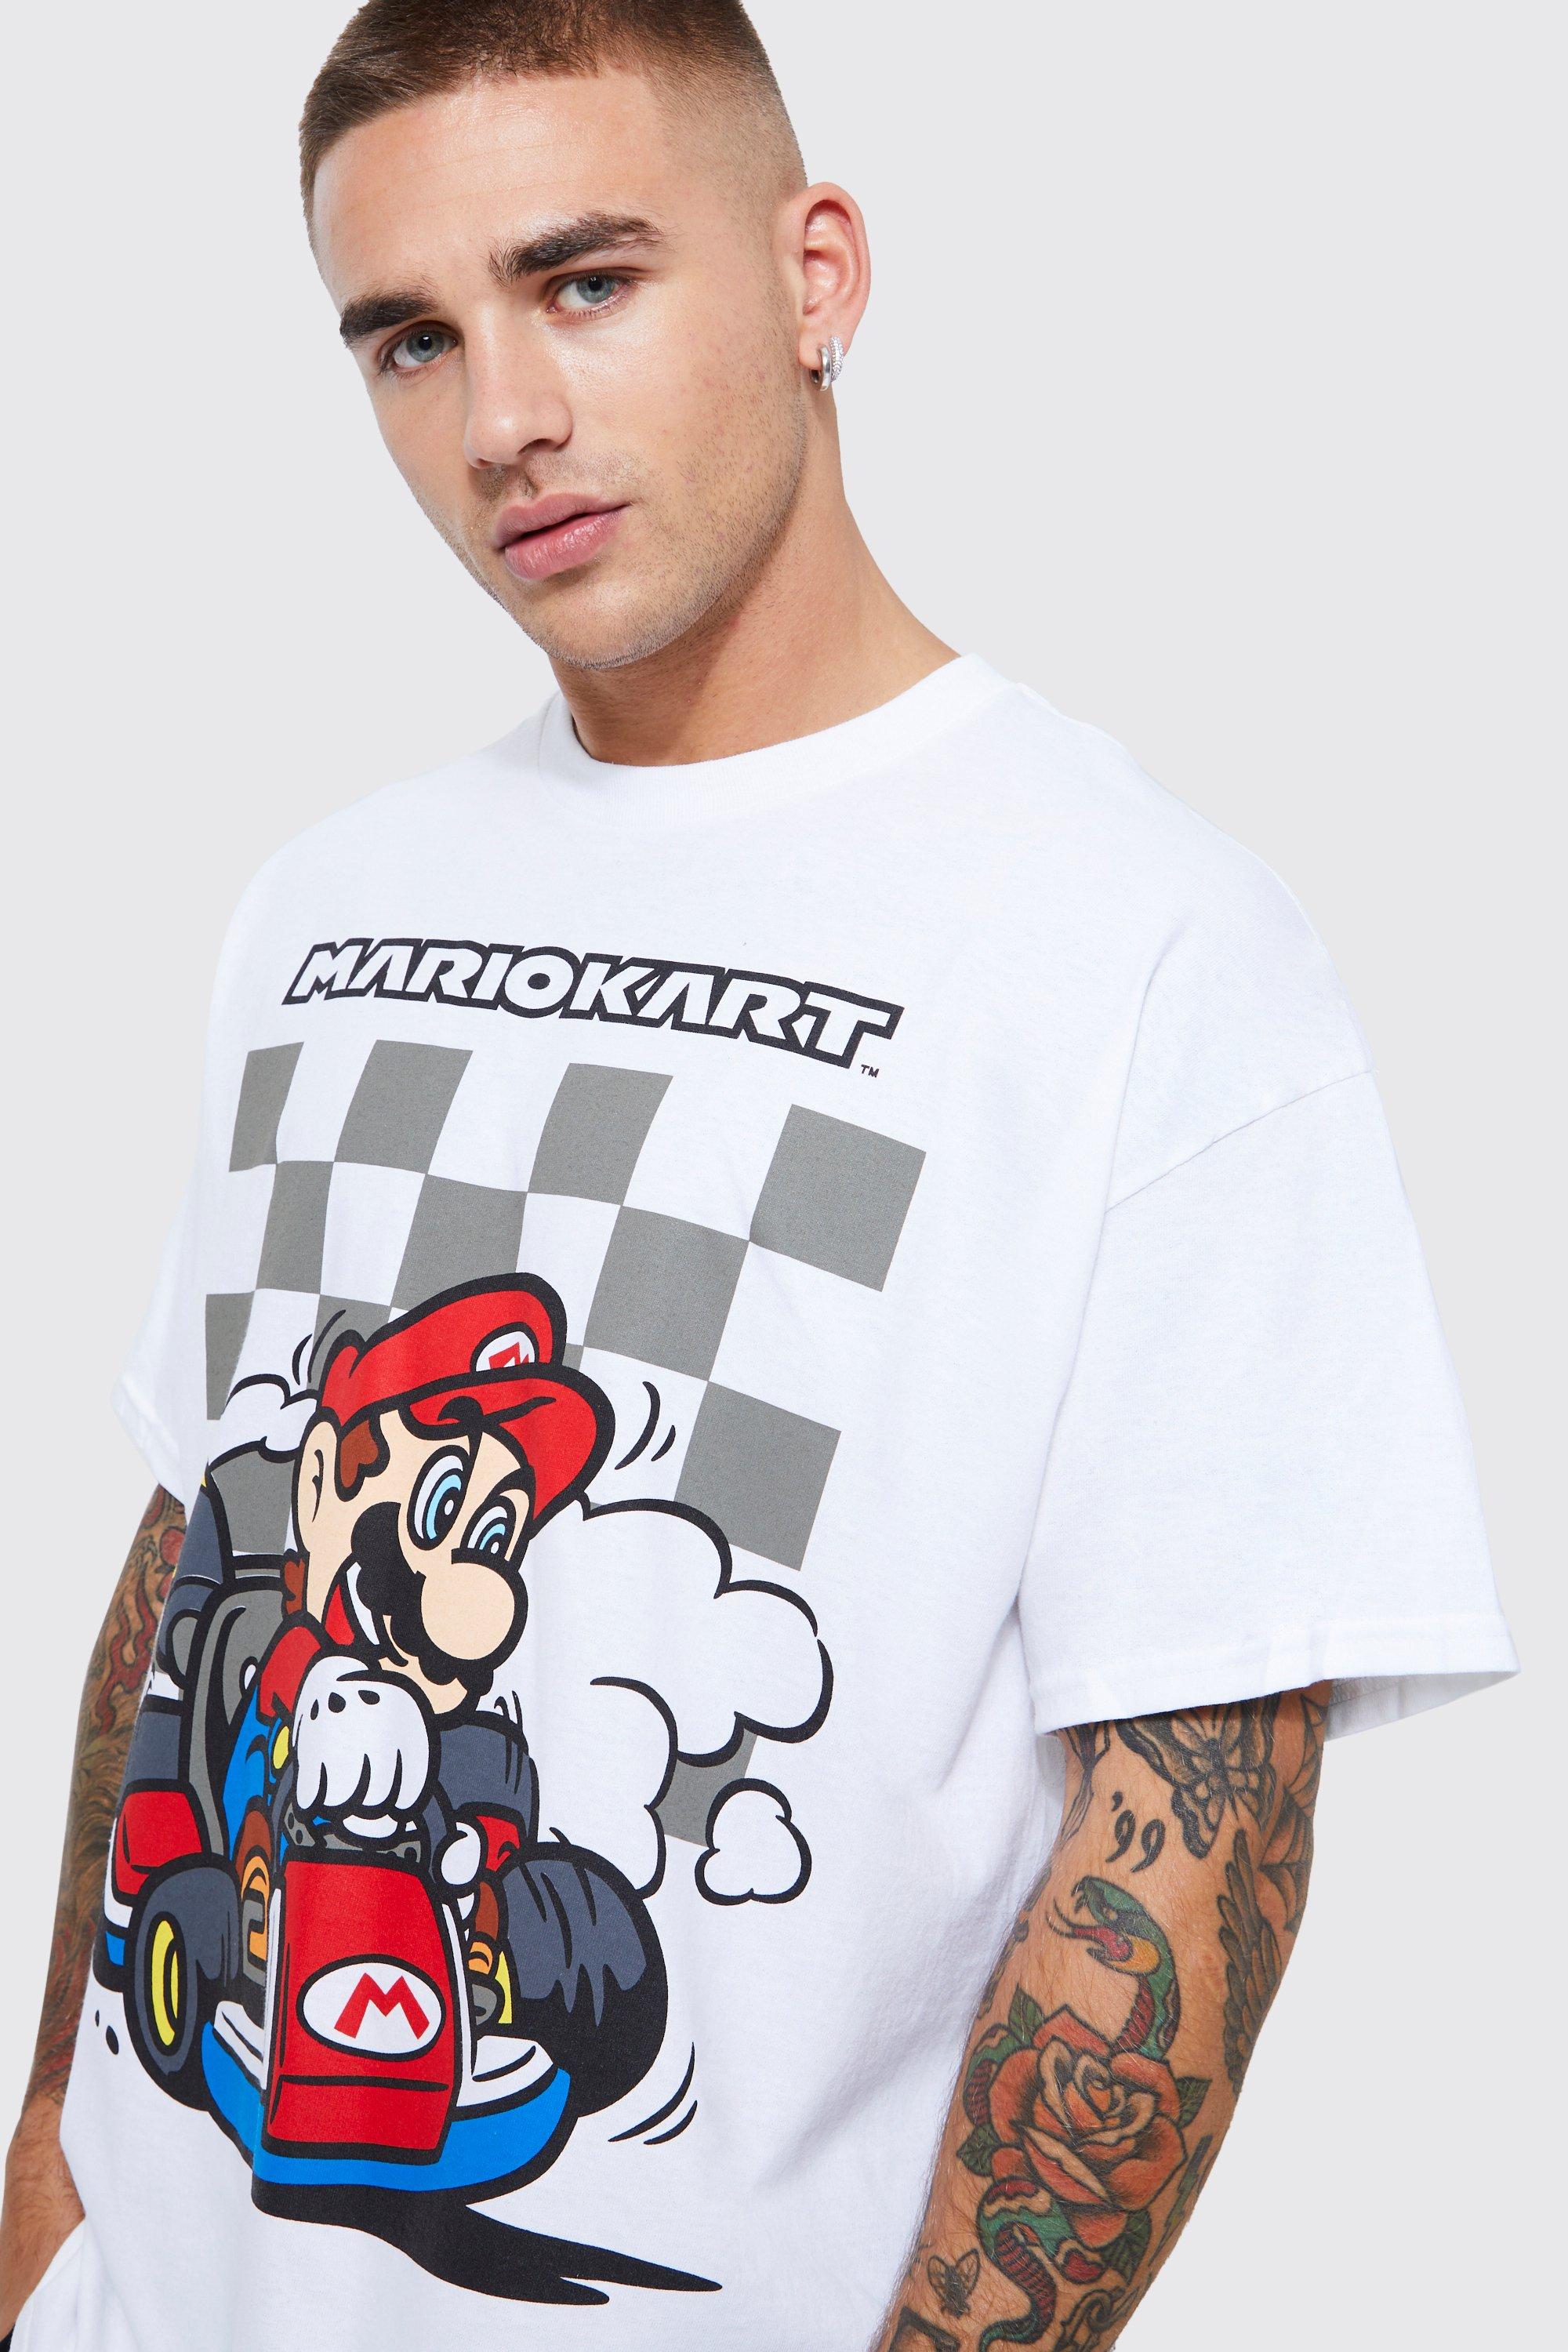 Klooster Farmacologie charme Oversized Super Mario License T-shirt | boohoo